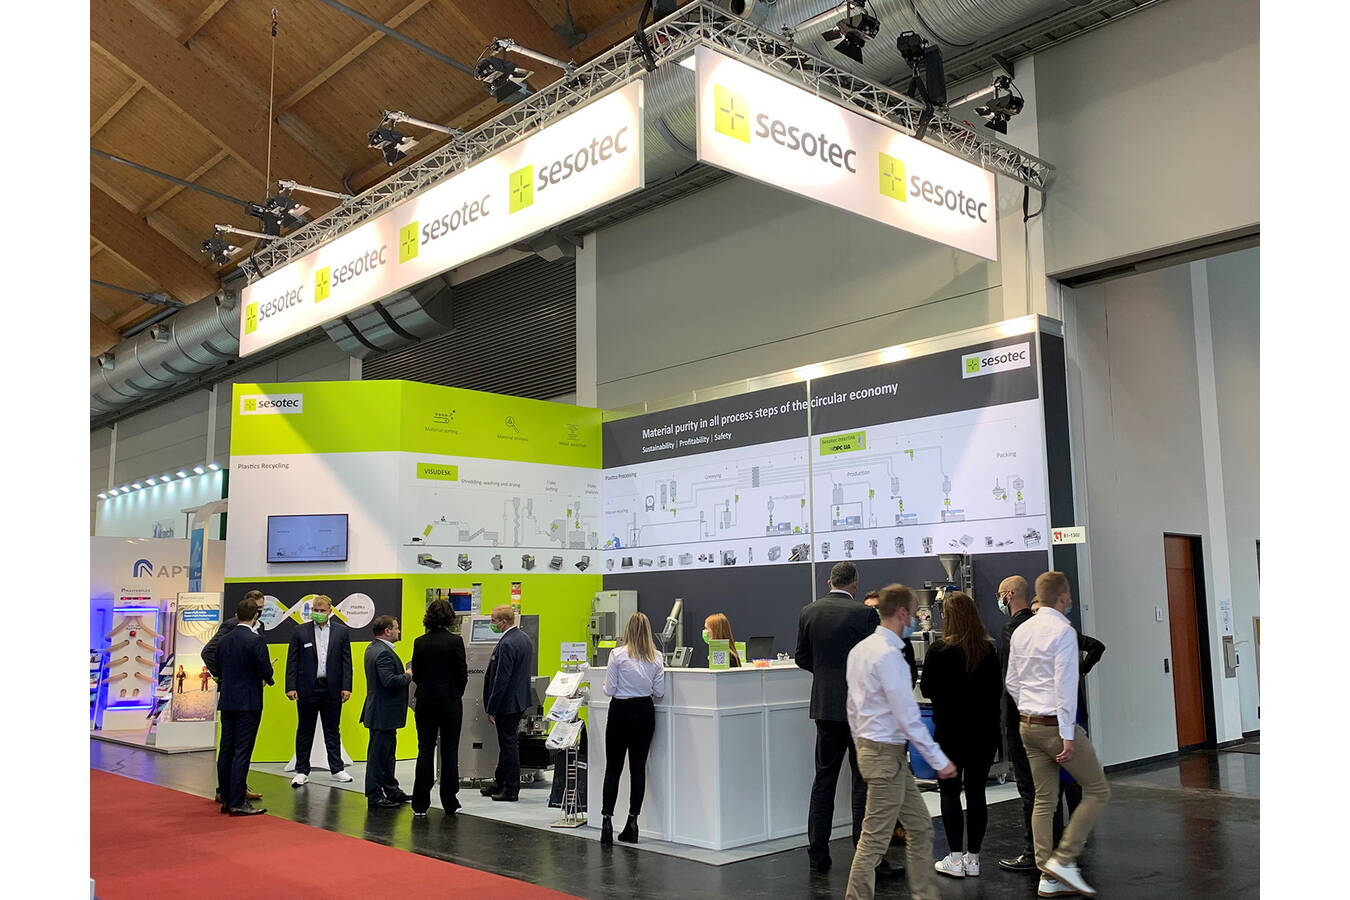 Finally, in-person conversation! Sesotec GmbH was delighted to greet so many visitors at their trade show booth at the 2021 Fakuma (Image: Sesotec GmbH)